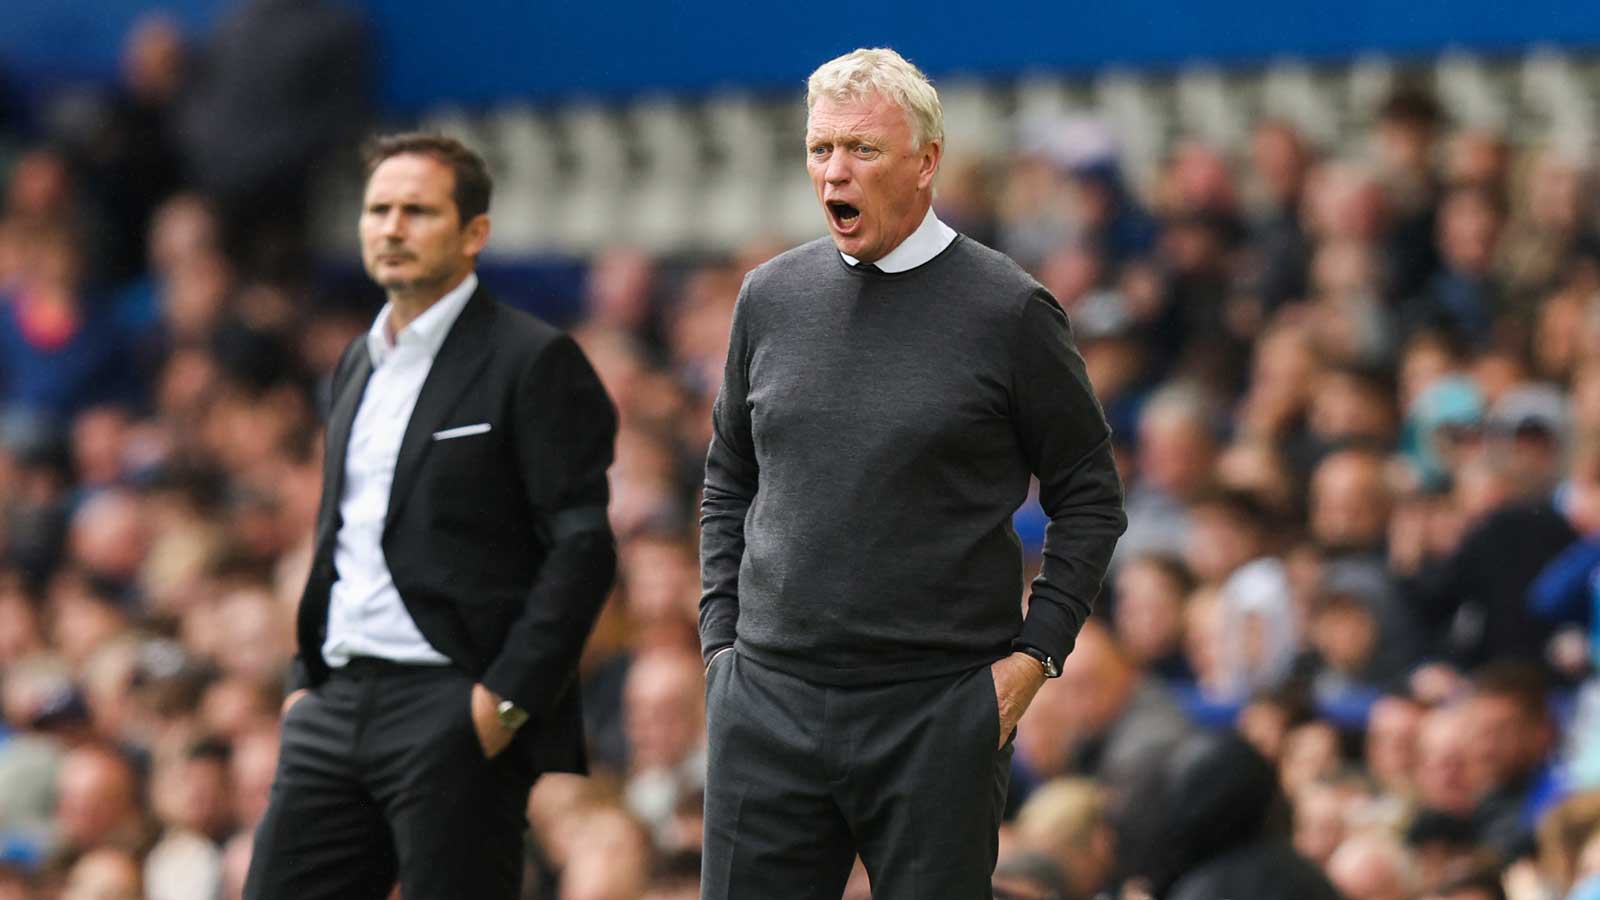 David Moyes and Frank Lampard on the touchline at Everton